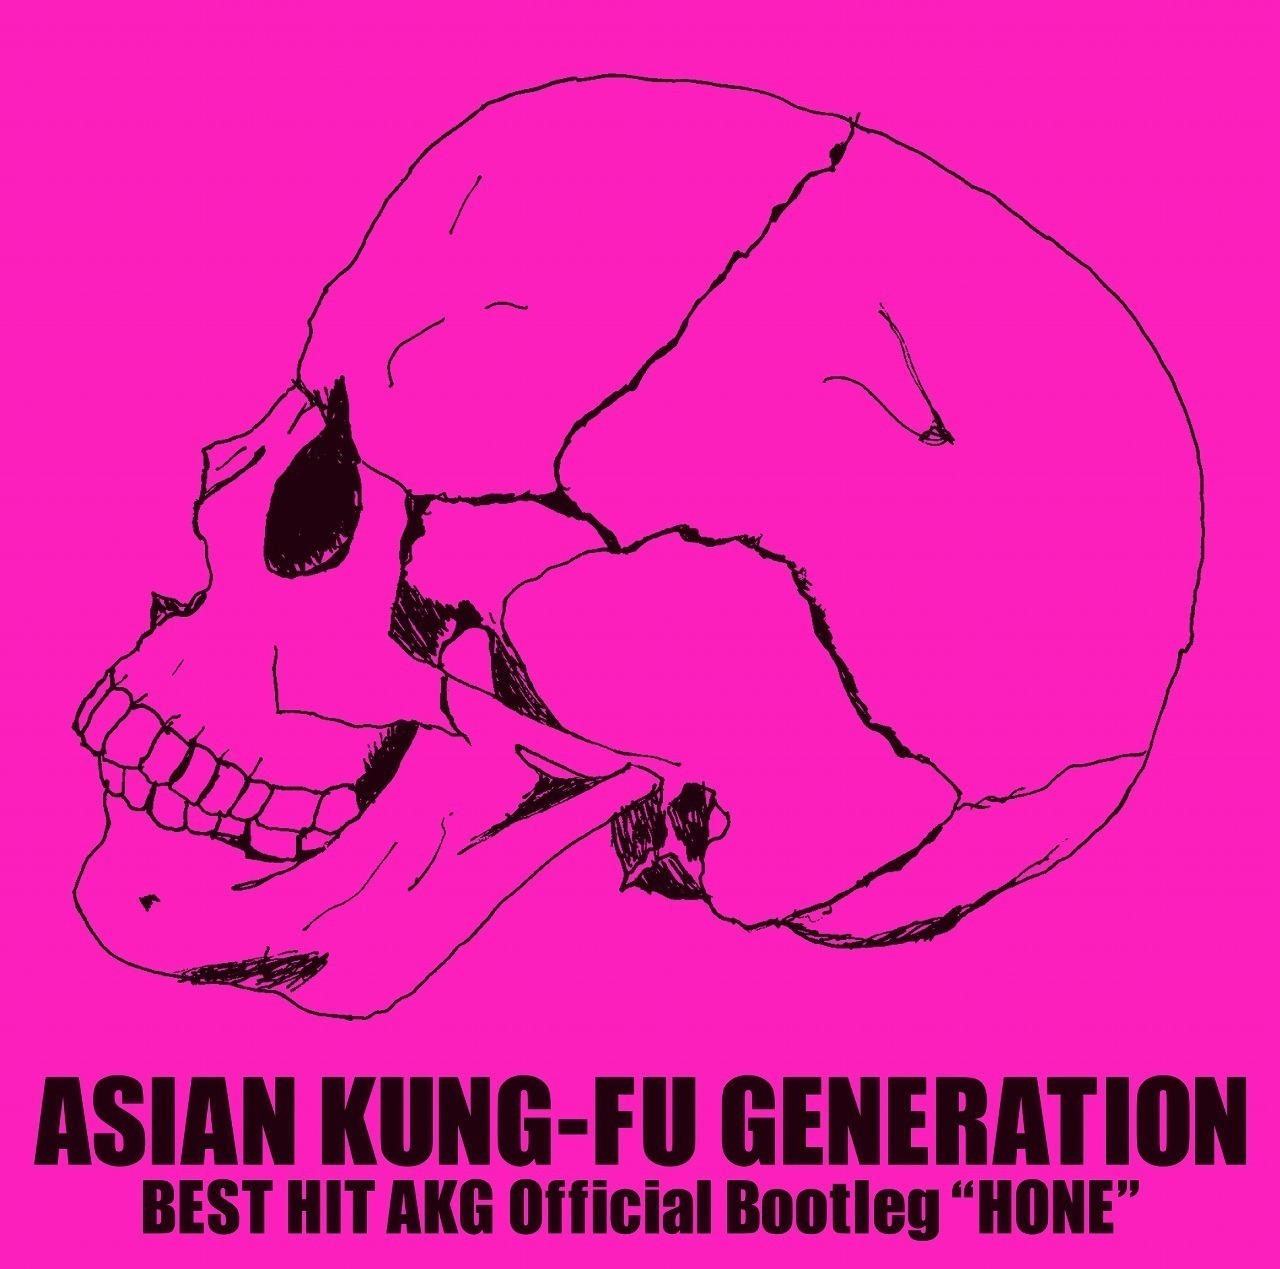 ASIAN KUNG-FU GENERATION BEST HIT AKG Official Bootleg “HONE”』『BEST HIT AKG Official Bootleg “IMO”